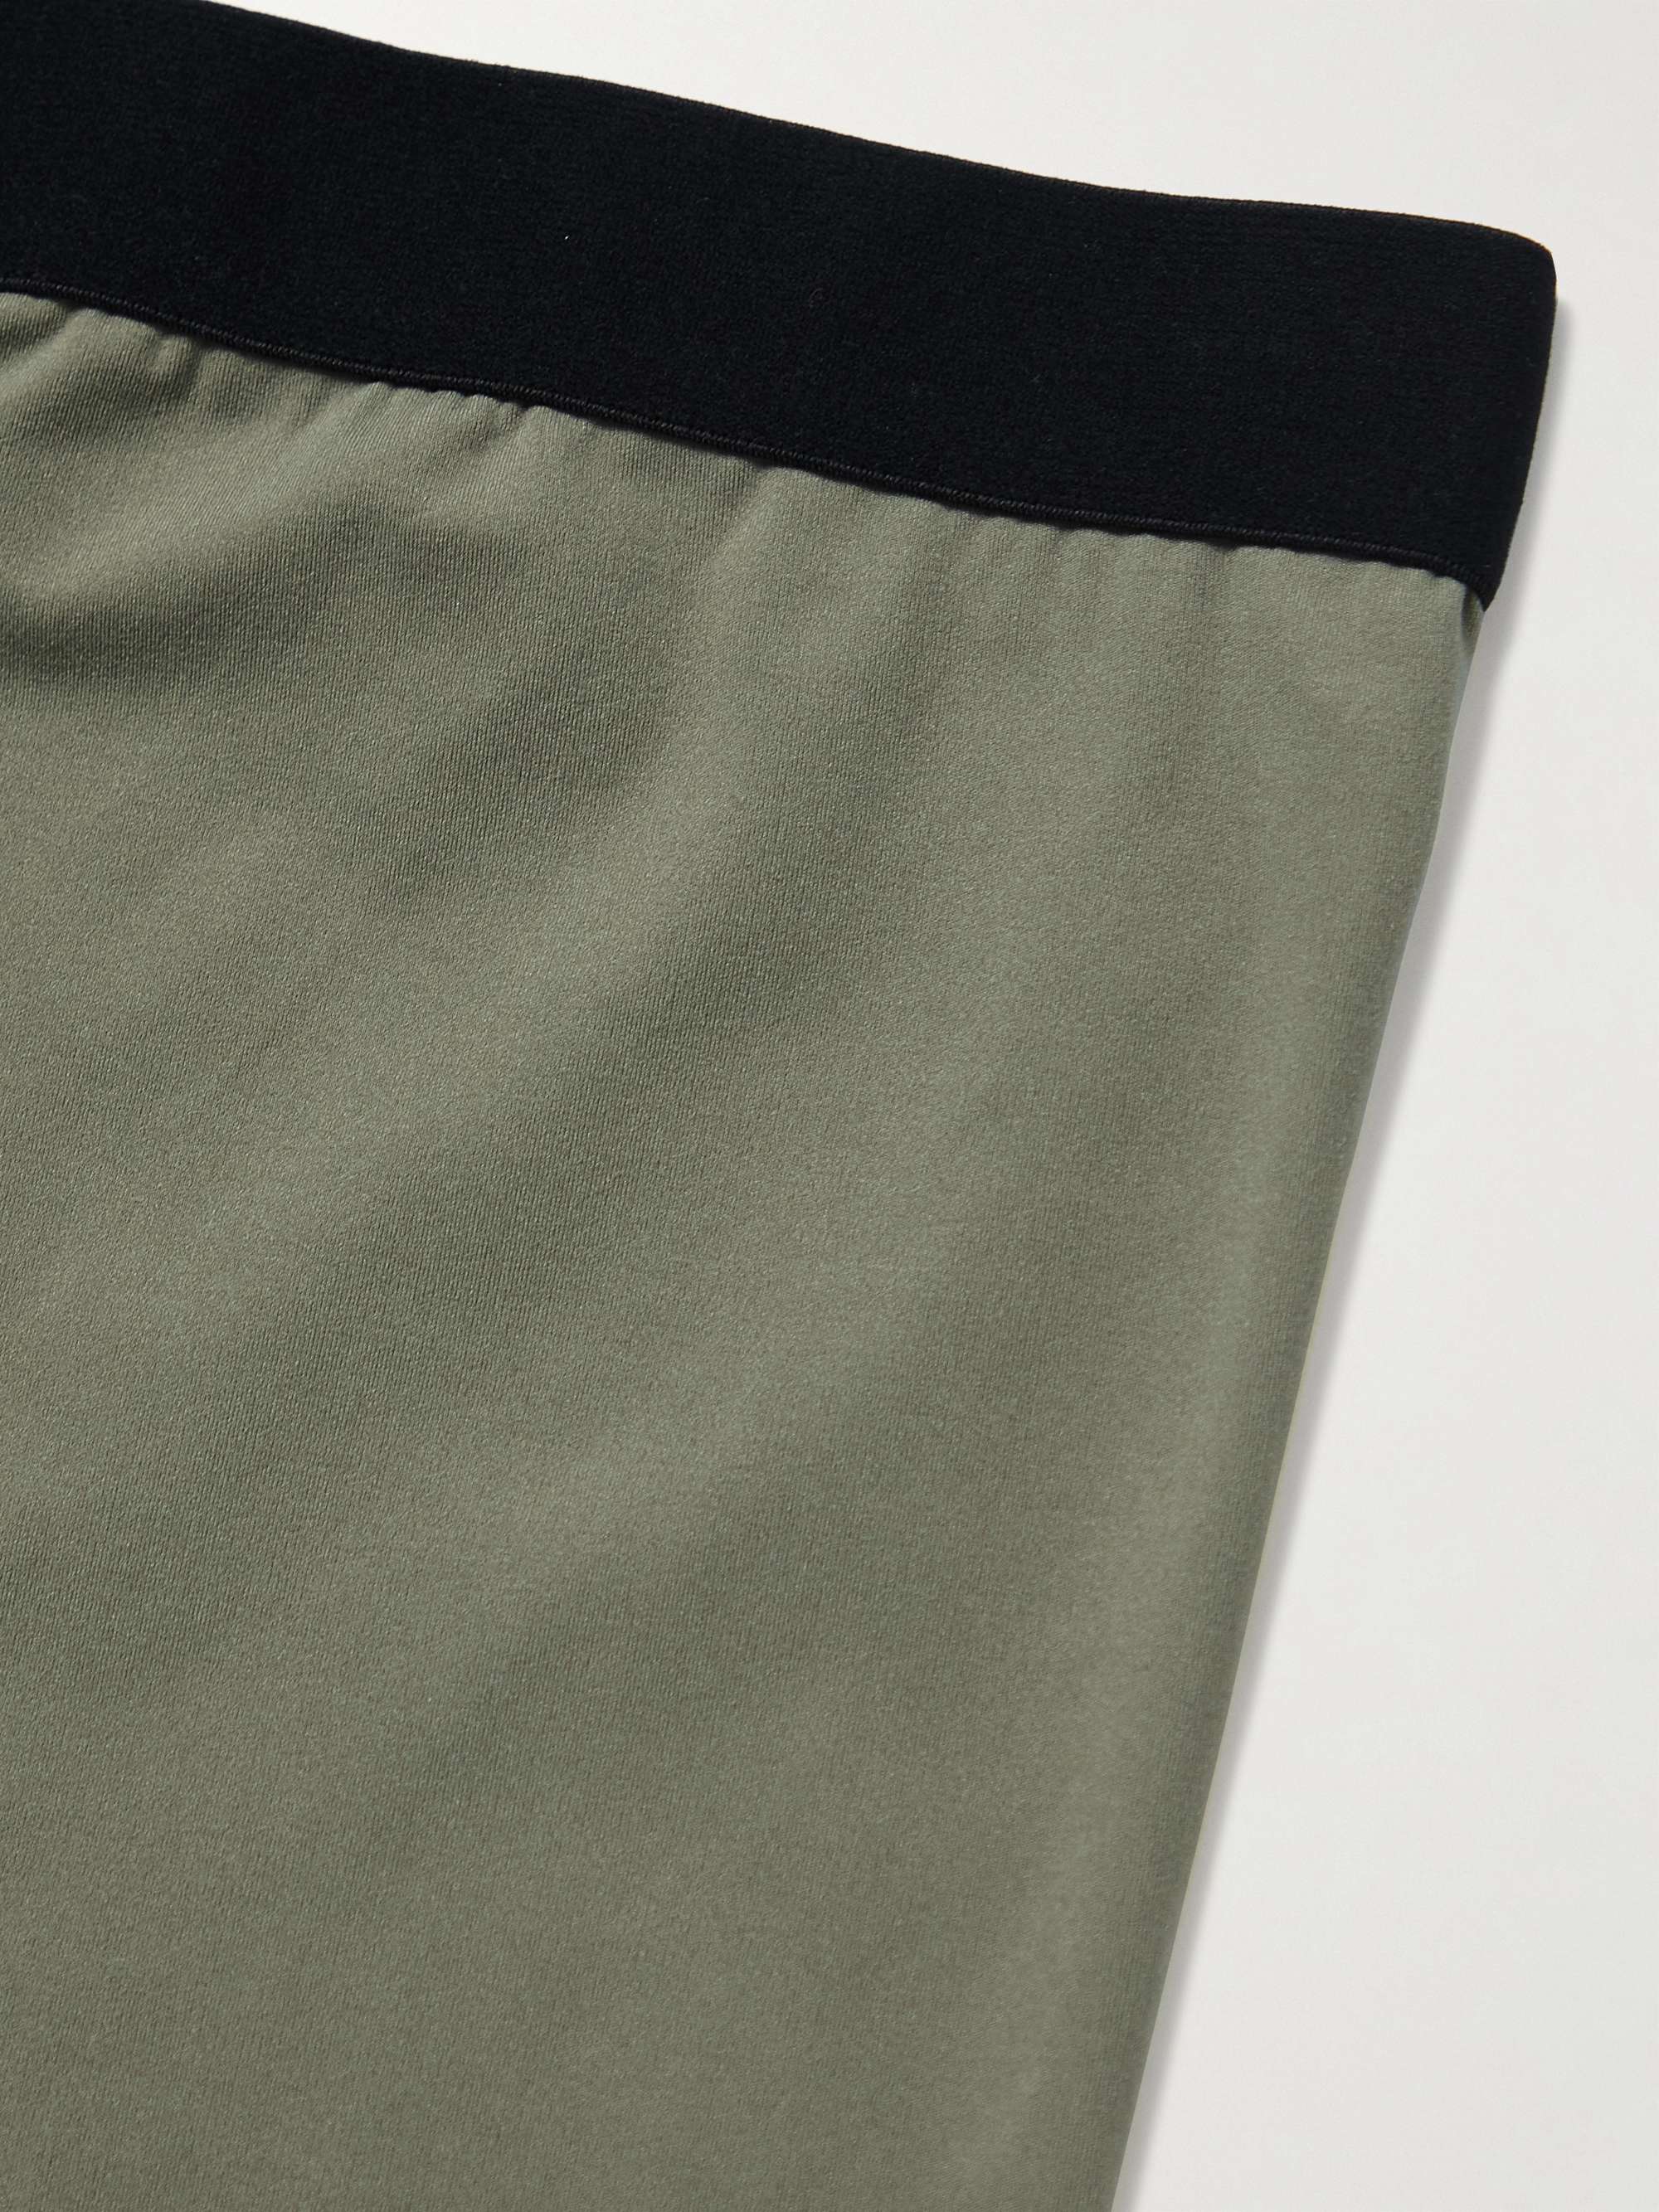 FEAR OF GOD ESSENTIALS Logo-Detailed Stretch-Jersey Shorts